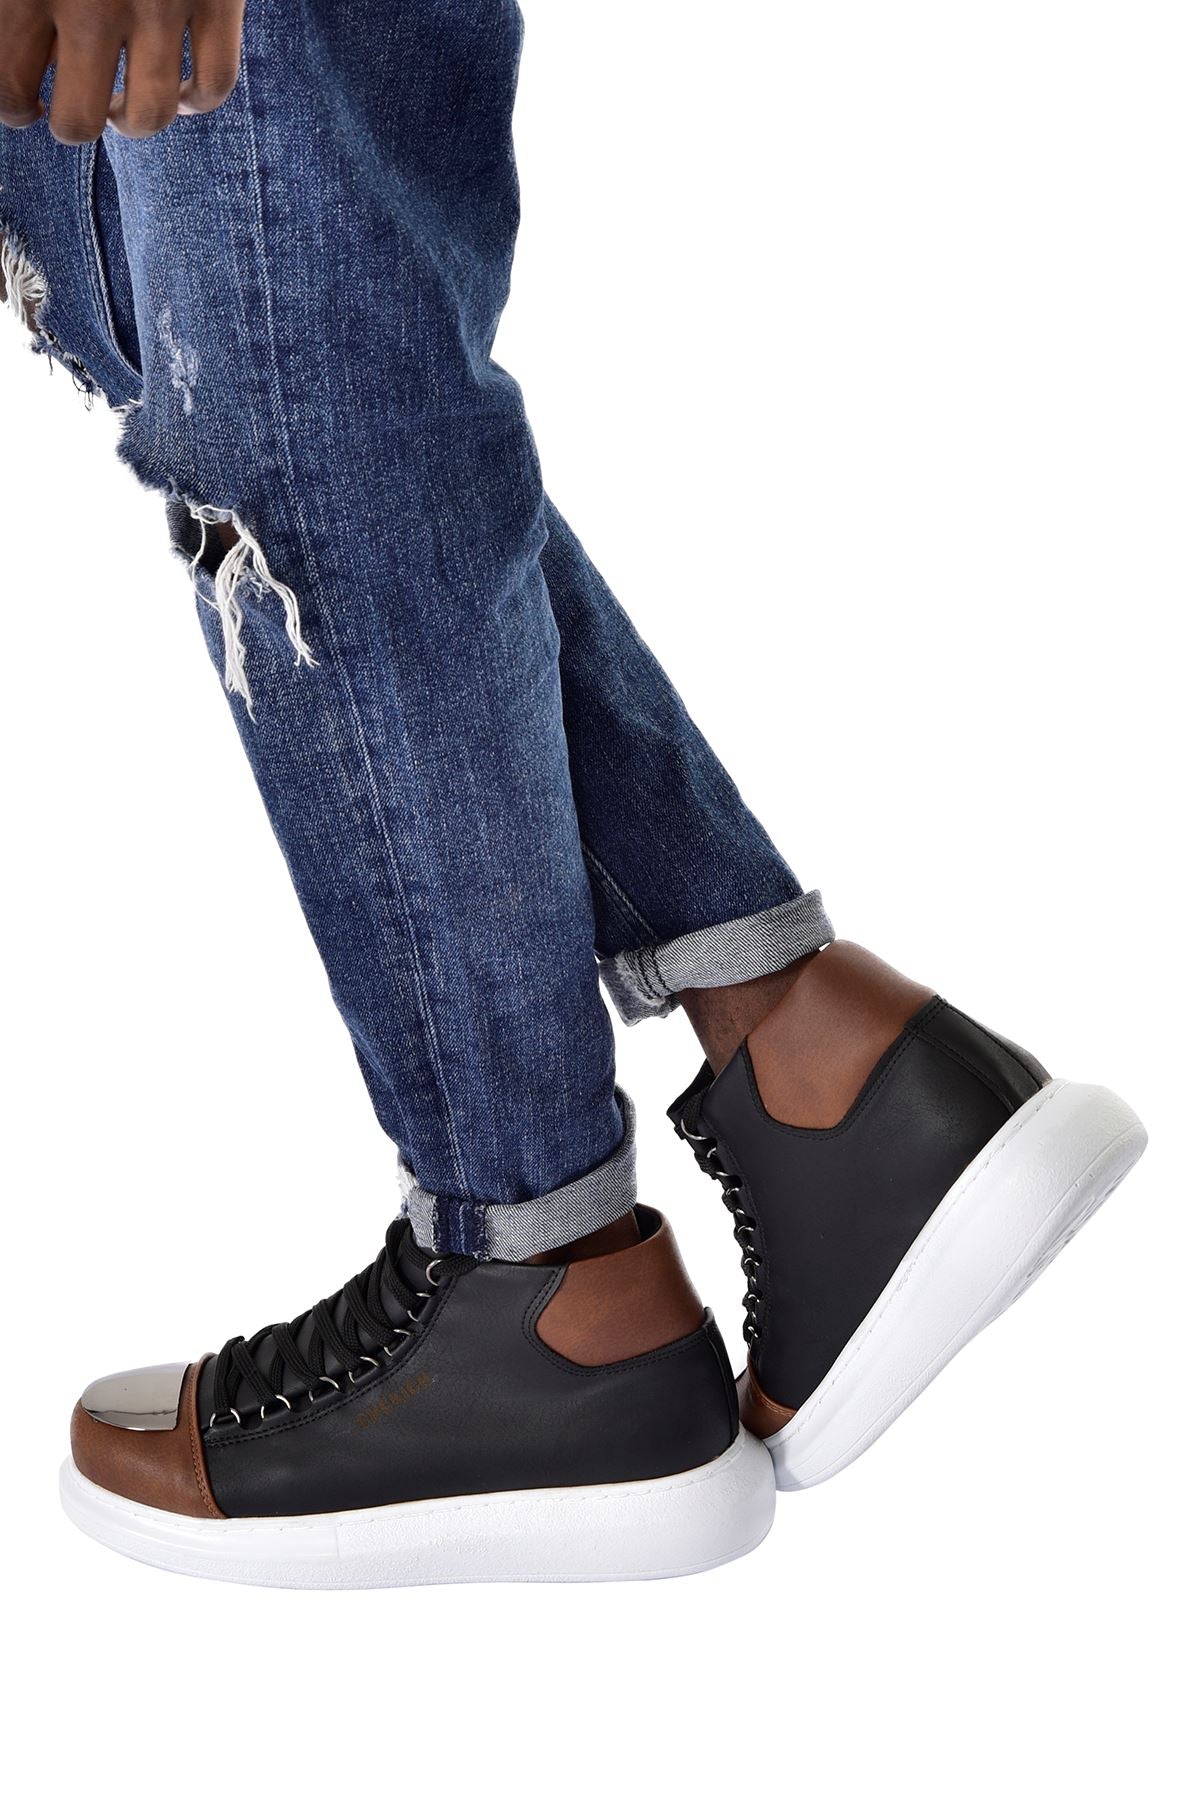 CH267 Men's shoes sneakers Boots BLACK/TANK - STREETMODE™